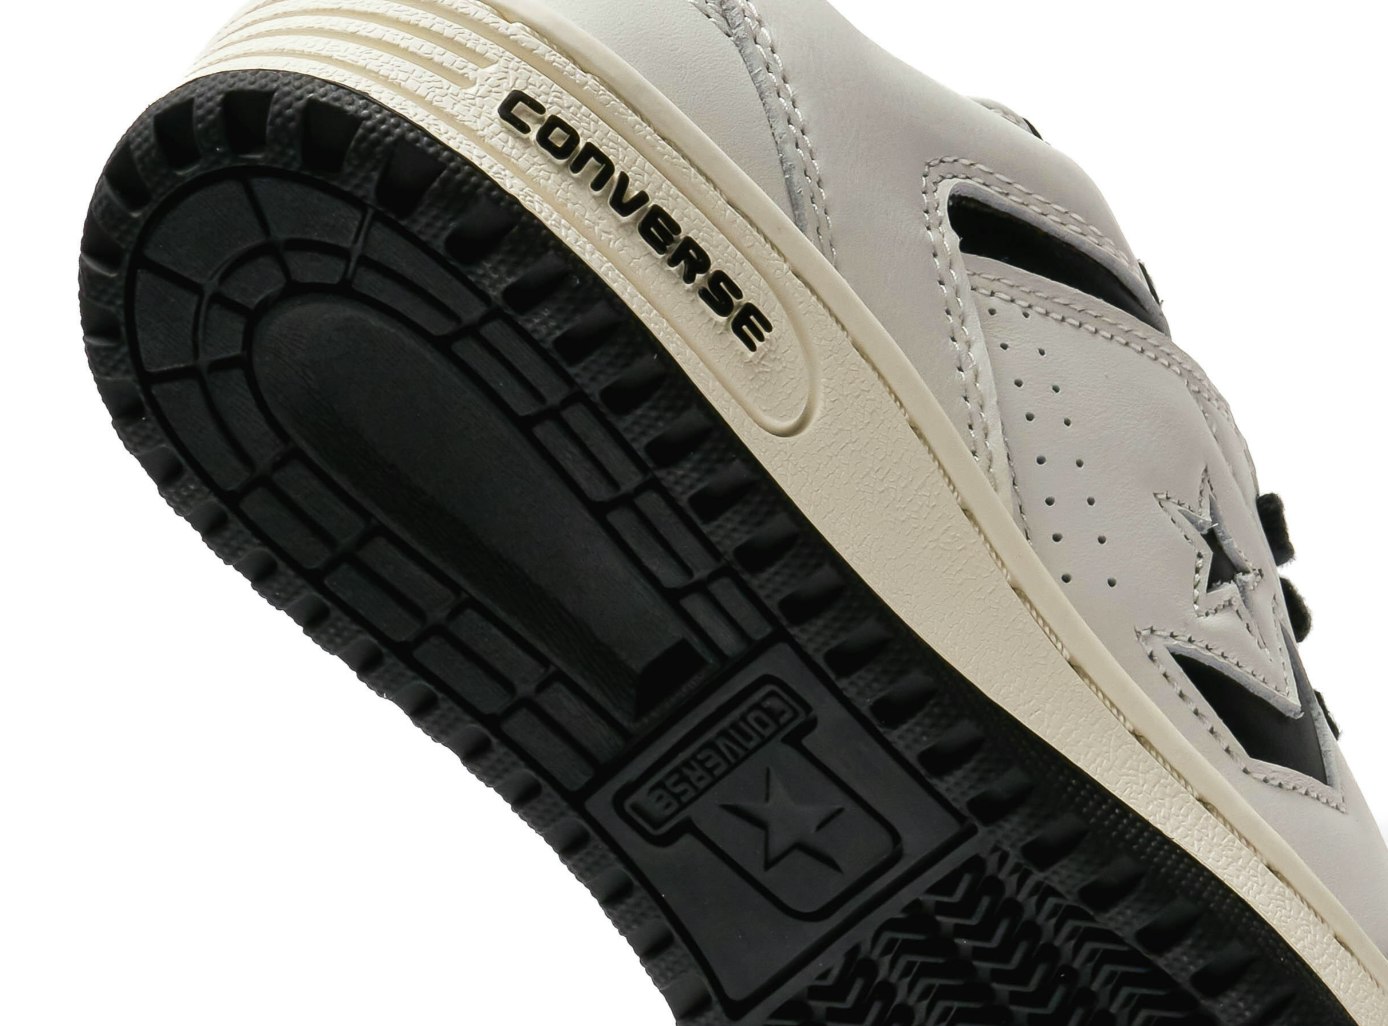 Old Money x Converse Weapon OX Low "Vintage White"